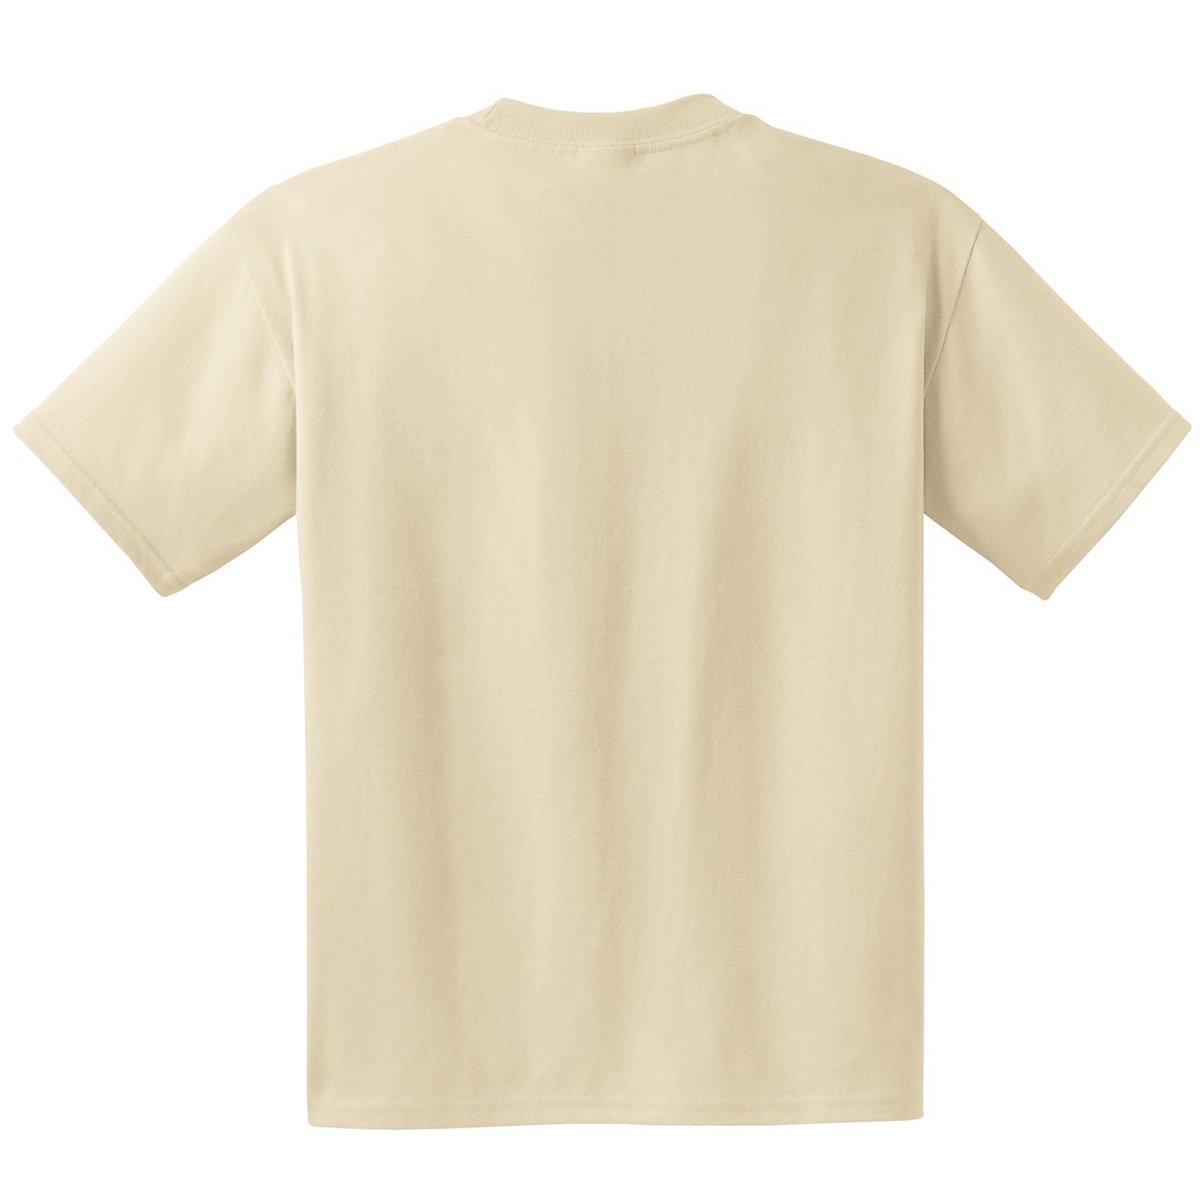 Hanes 5190 Beefy-T Cotton T-Shirt with Pocket - Sand | FullSource.com